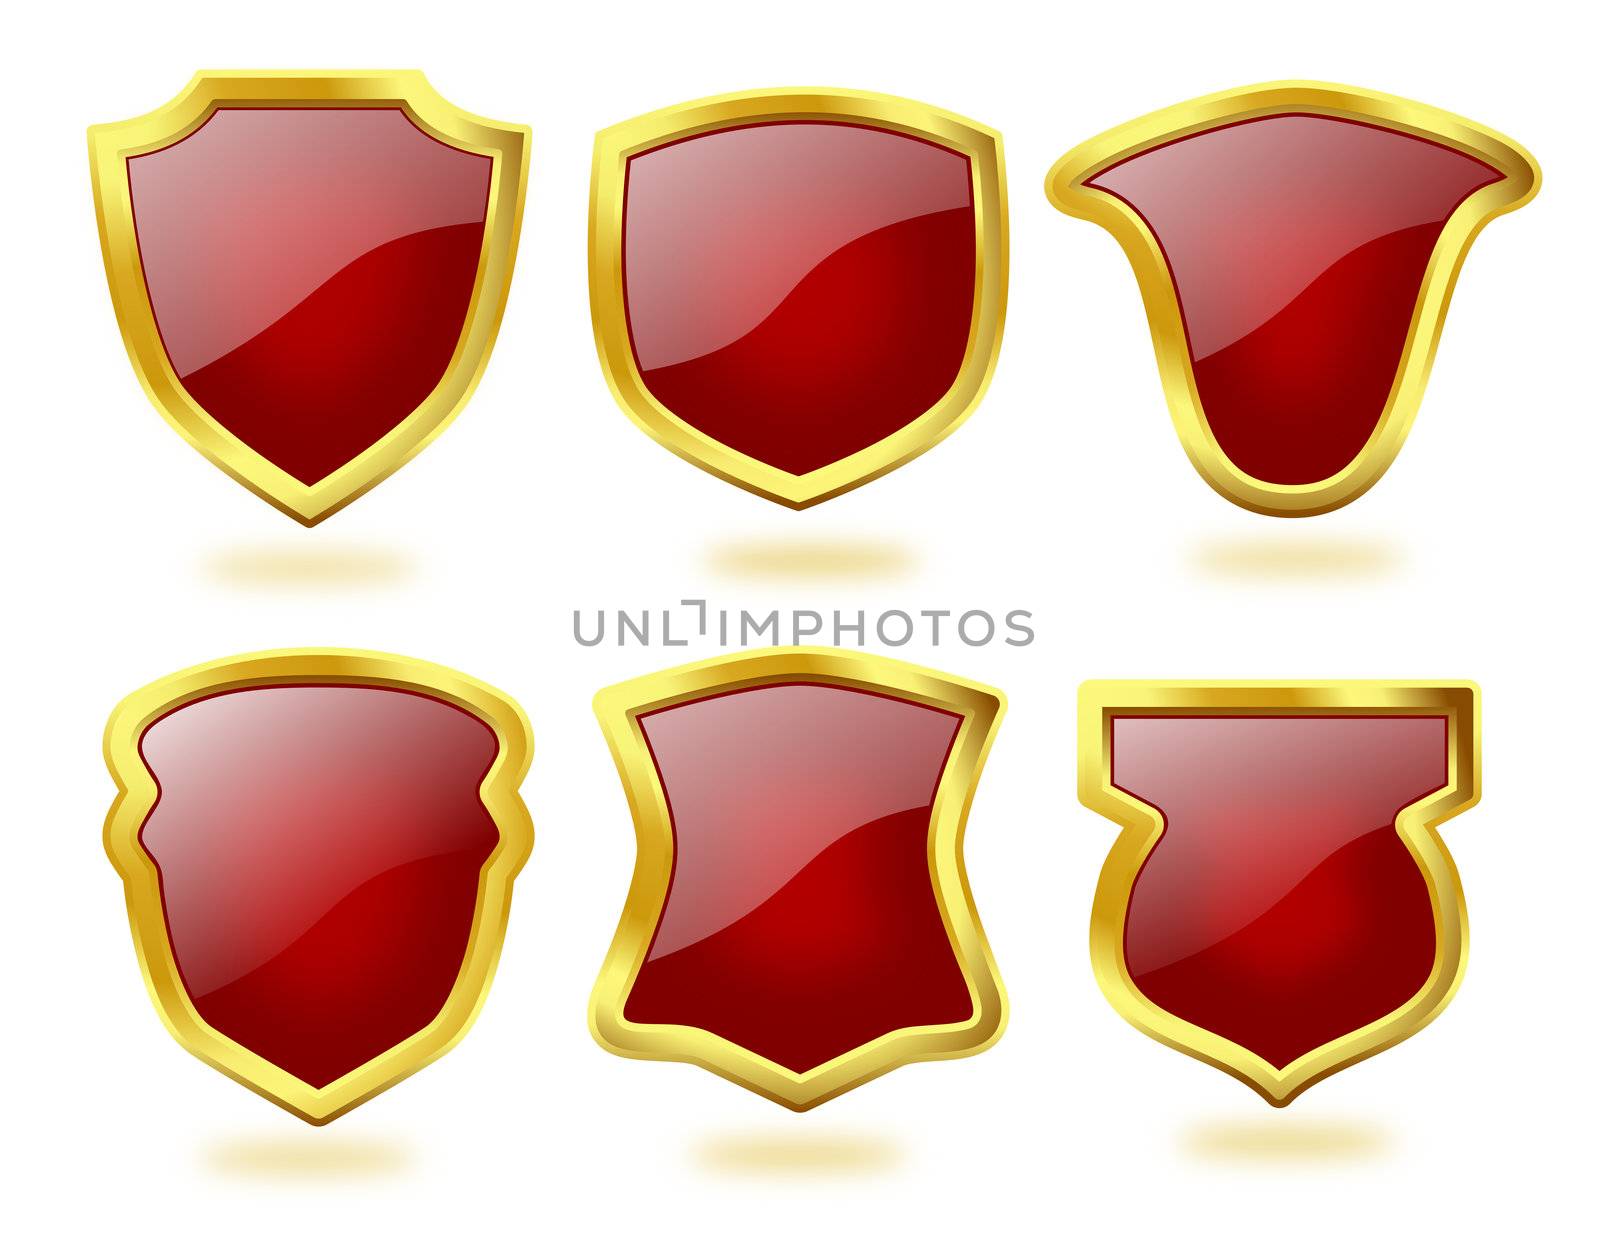 A collection of six shield icon badges in deep red color and with golden frames